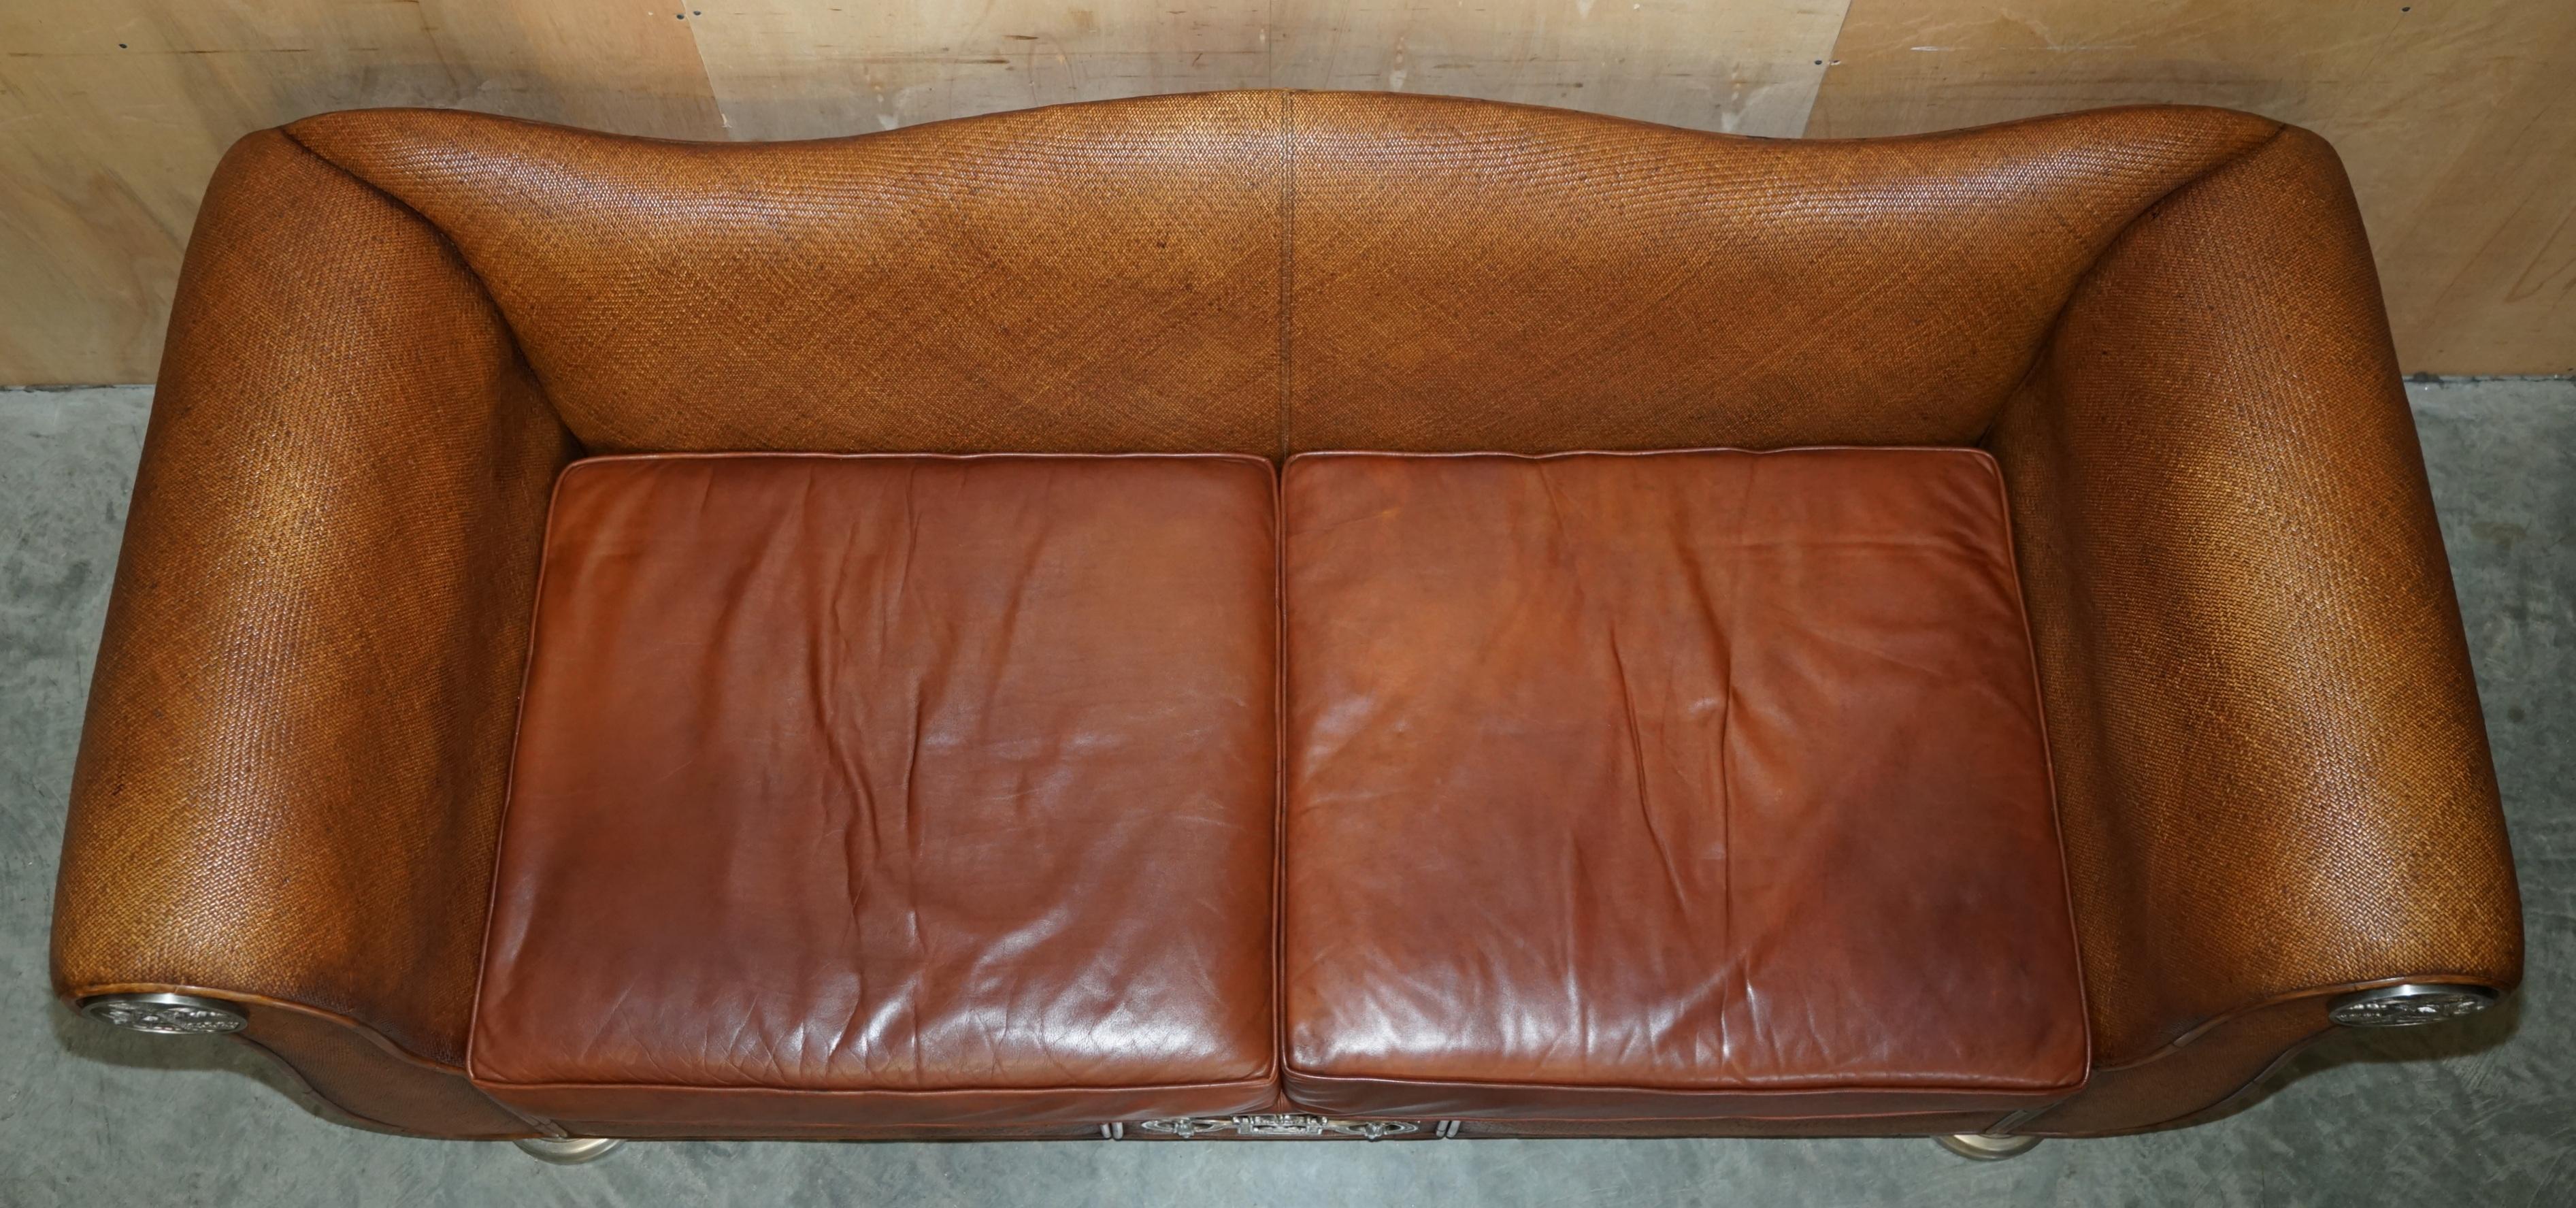 RARE PAIR OF THOMASVILLE SAFARI BROWN LEATHER WOVEN SOFAS PART OF LARGE SUITe For Sale 6